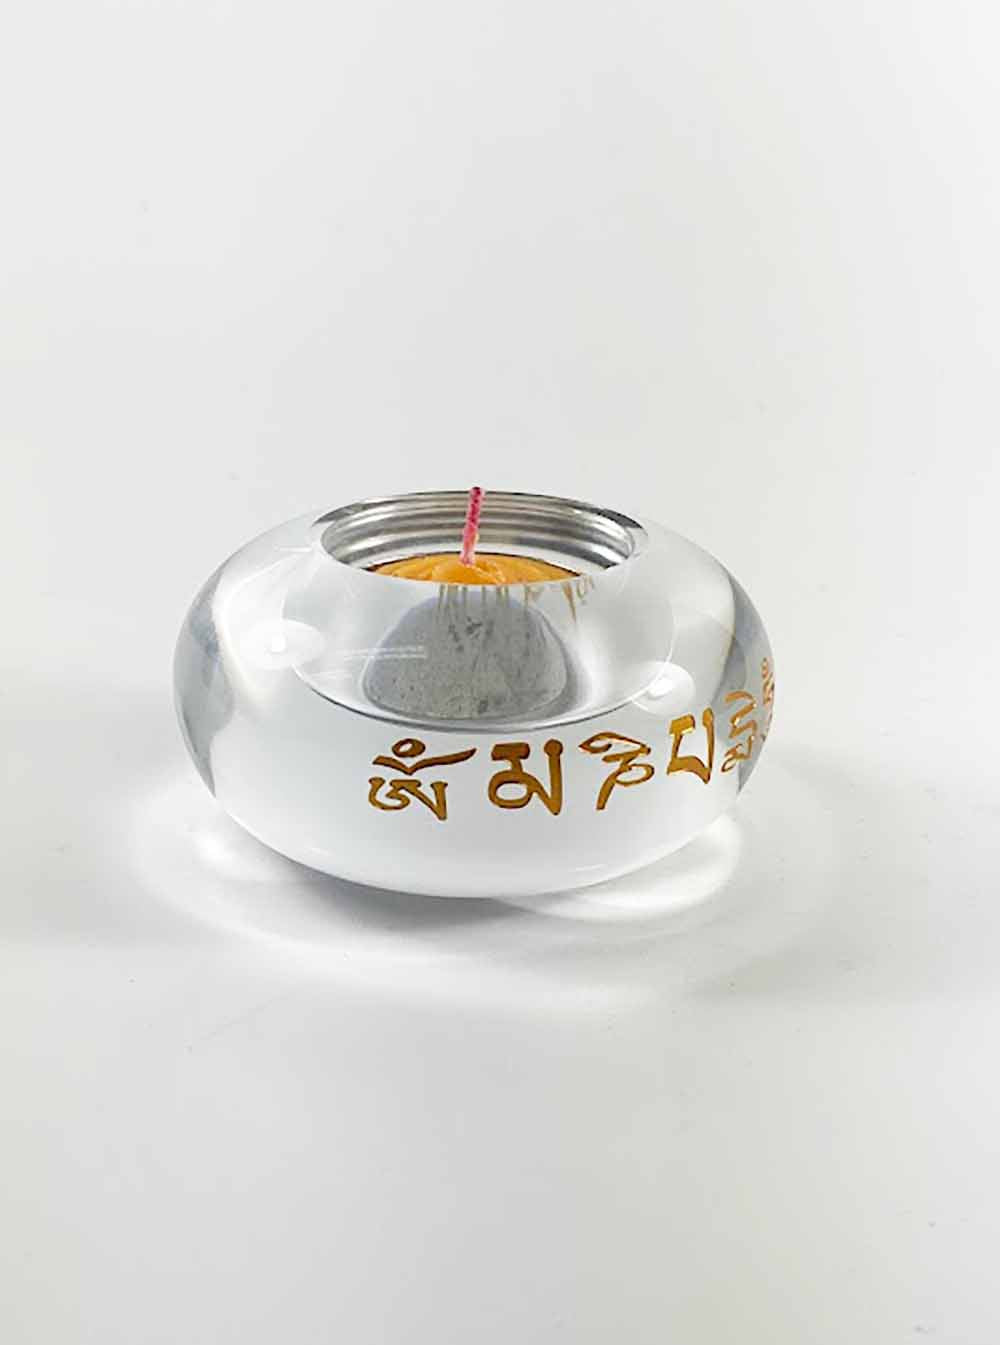 Six Syllables Mantra Crystal Drum-shaped Candle Holder